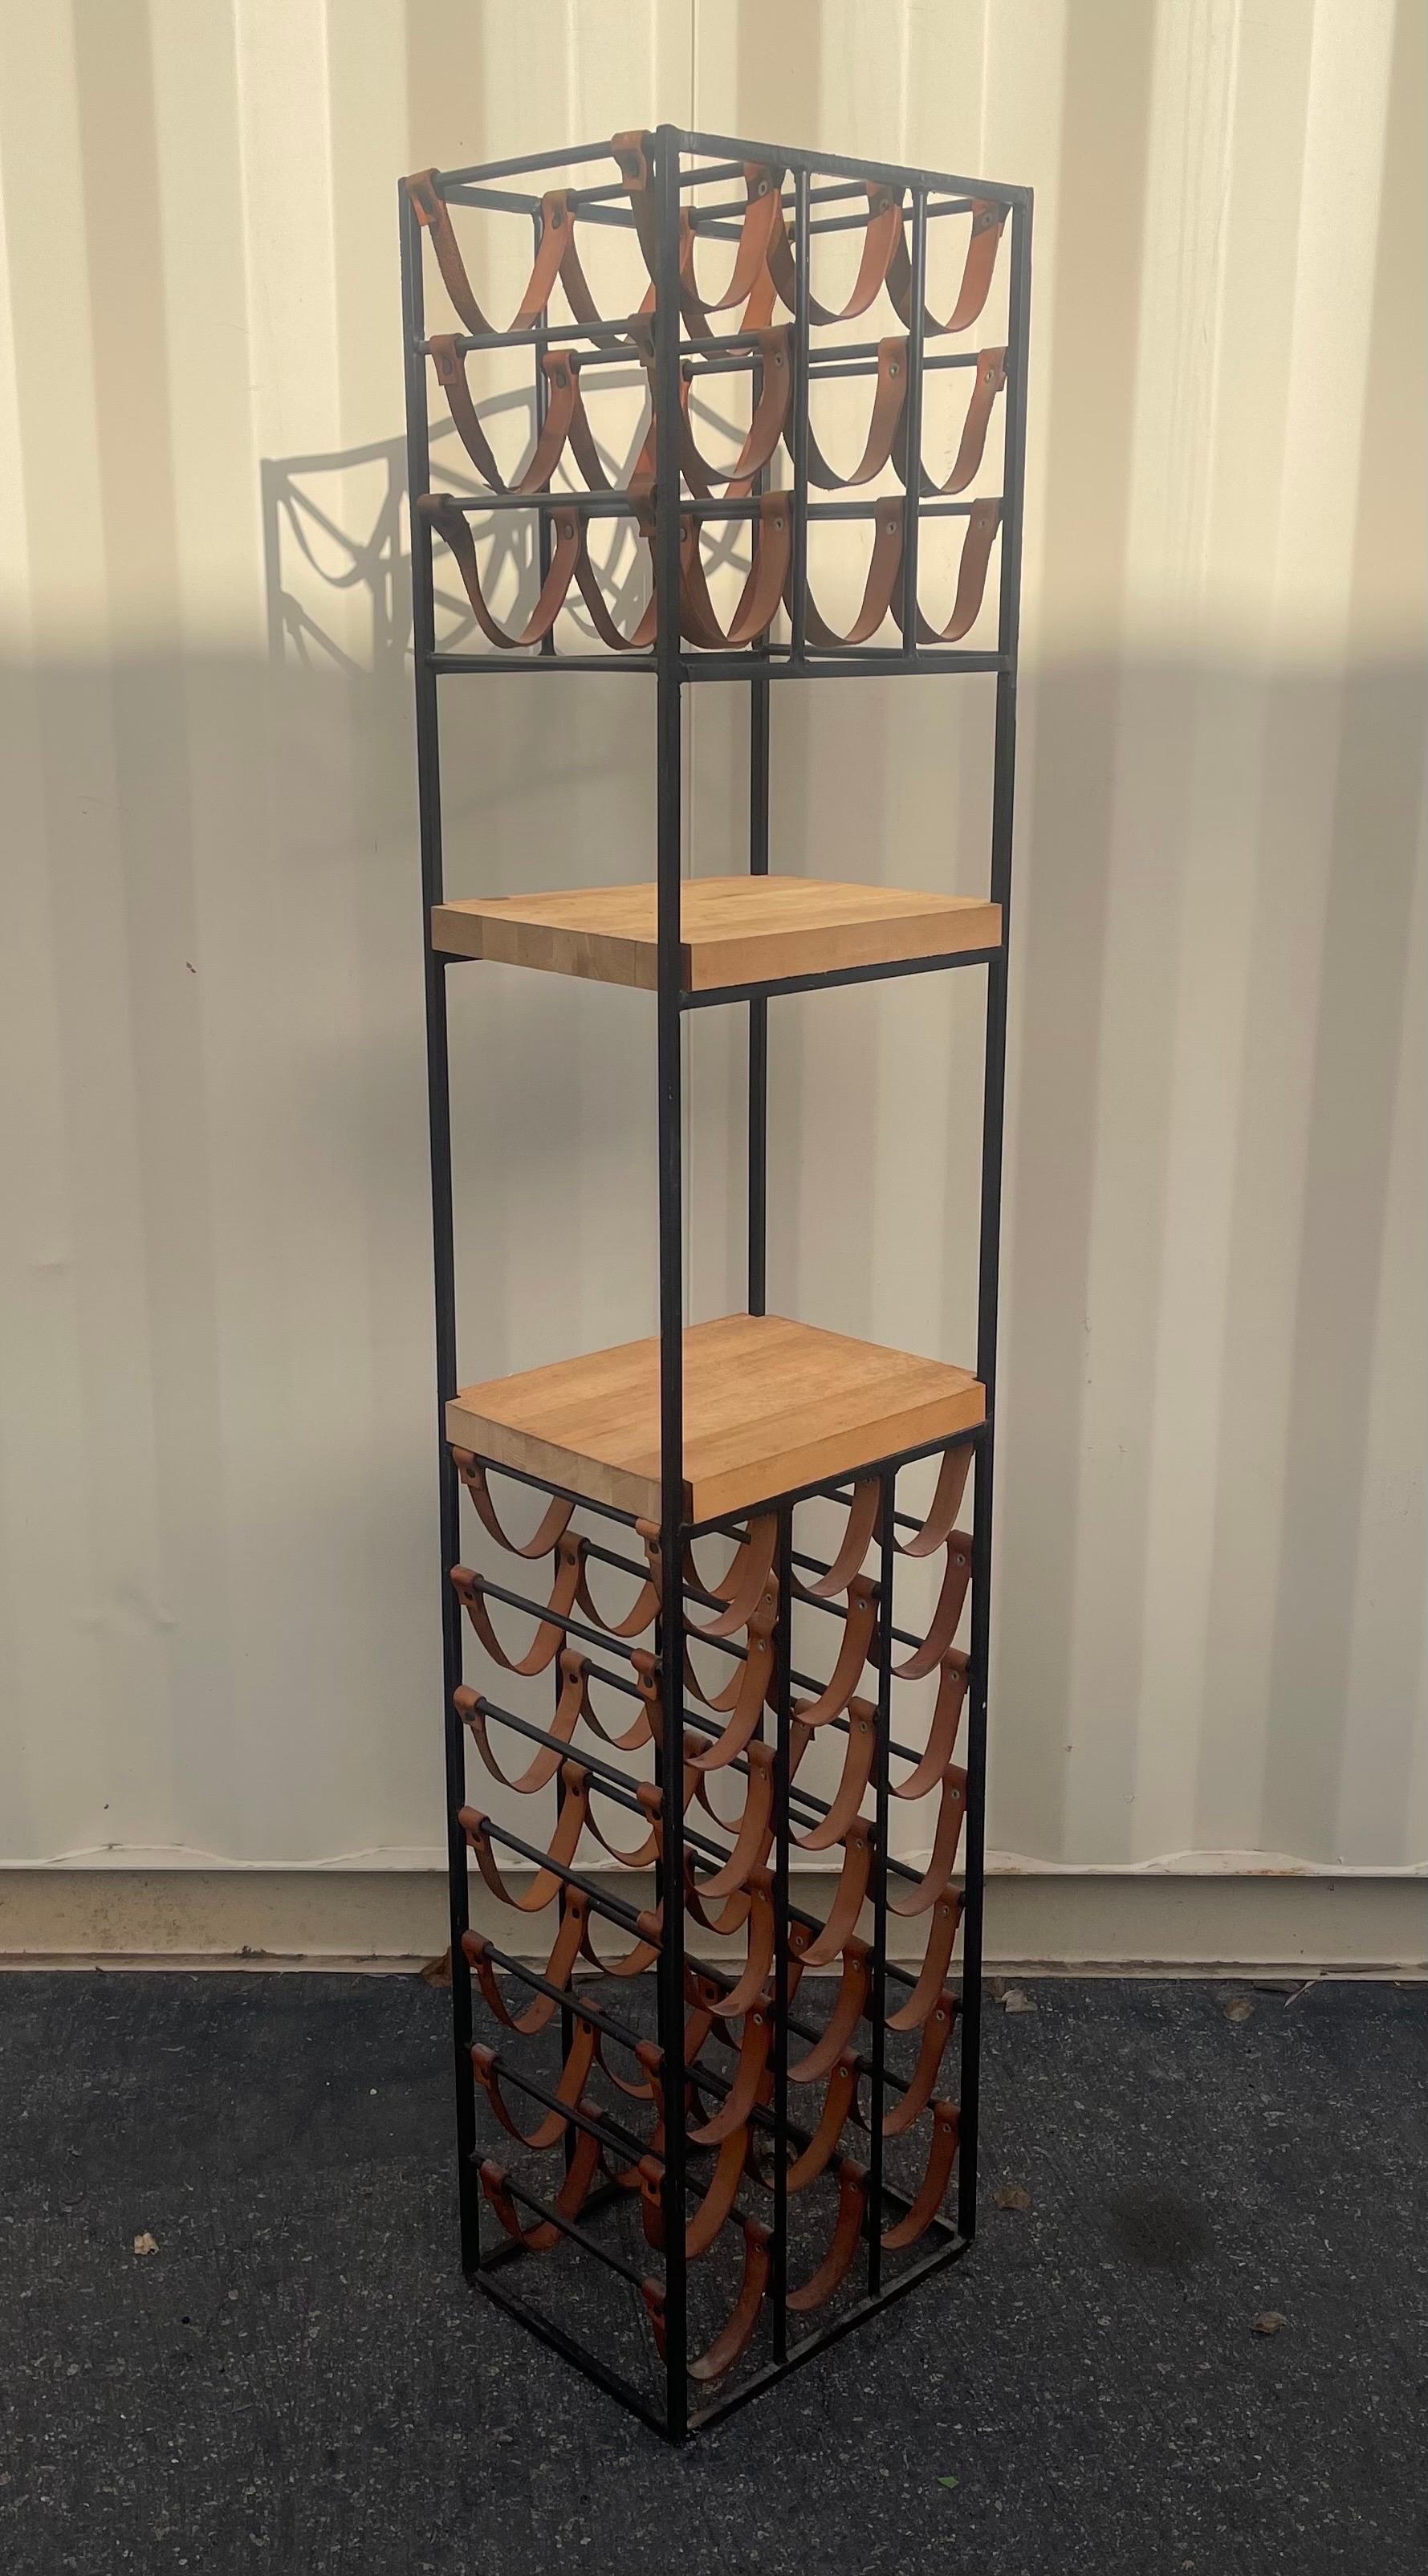 Wrought iron and butcher block thirty bottle wine rack by Arthur Umanoff, circa 1950s.  The tower unit measures 14